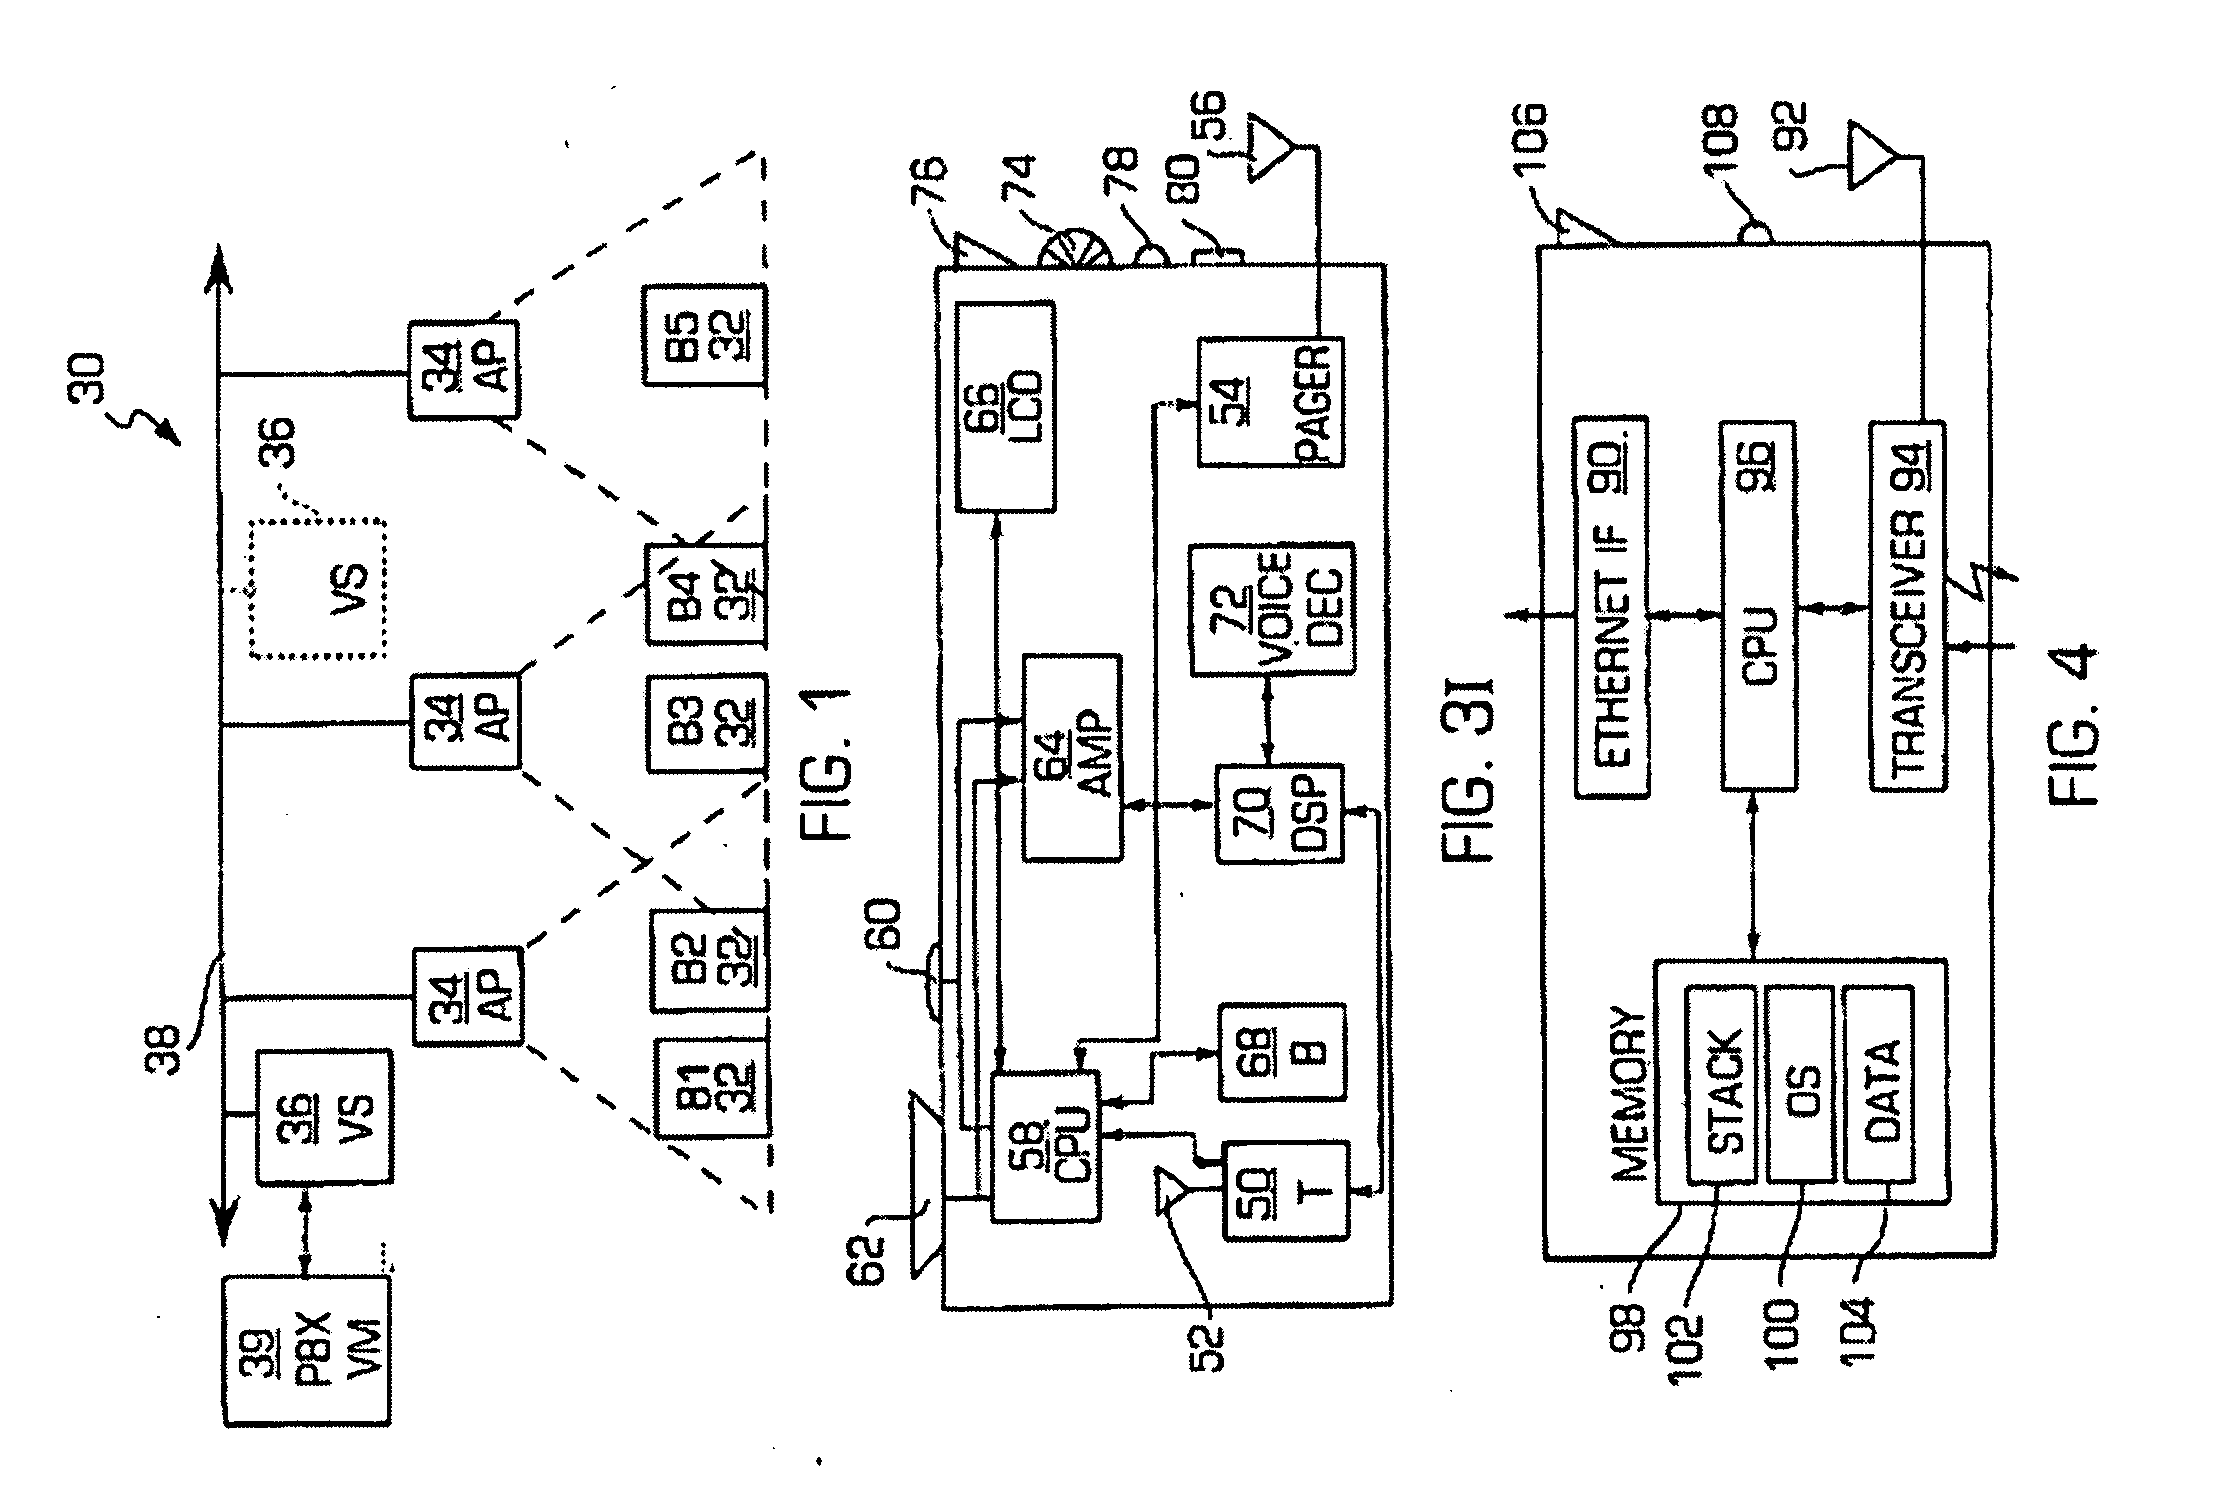 Voice-controlled communications system and method having an access device